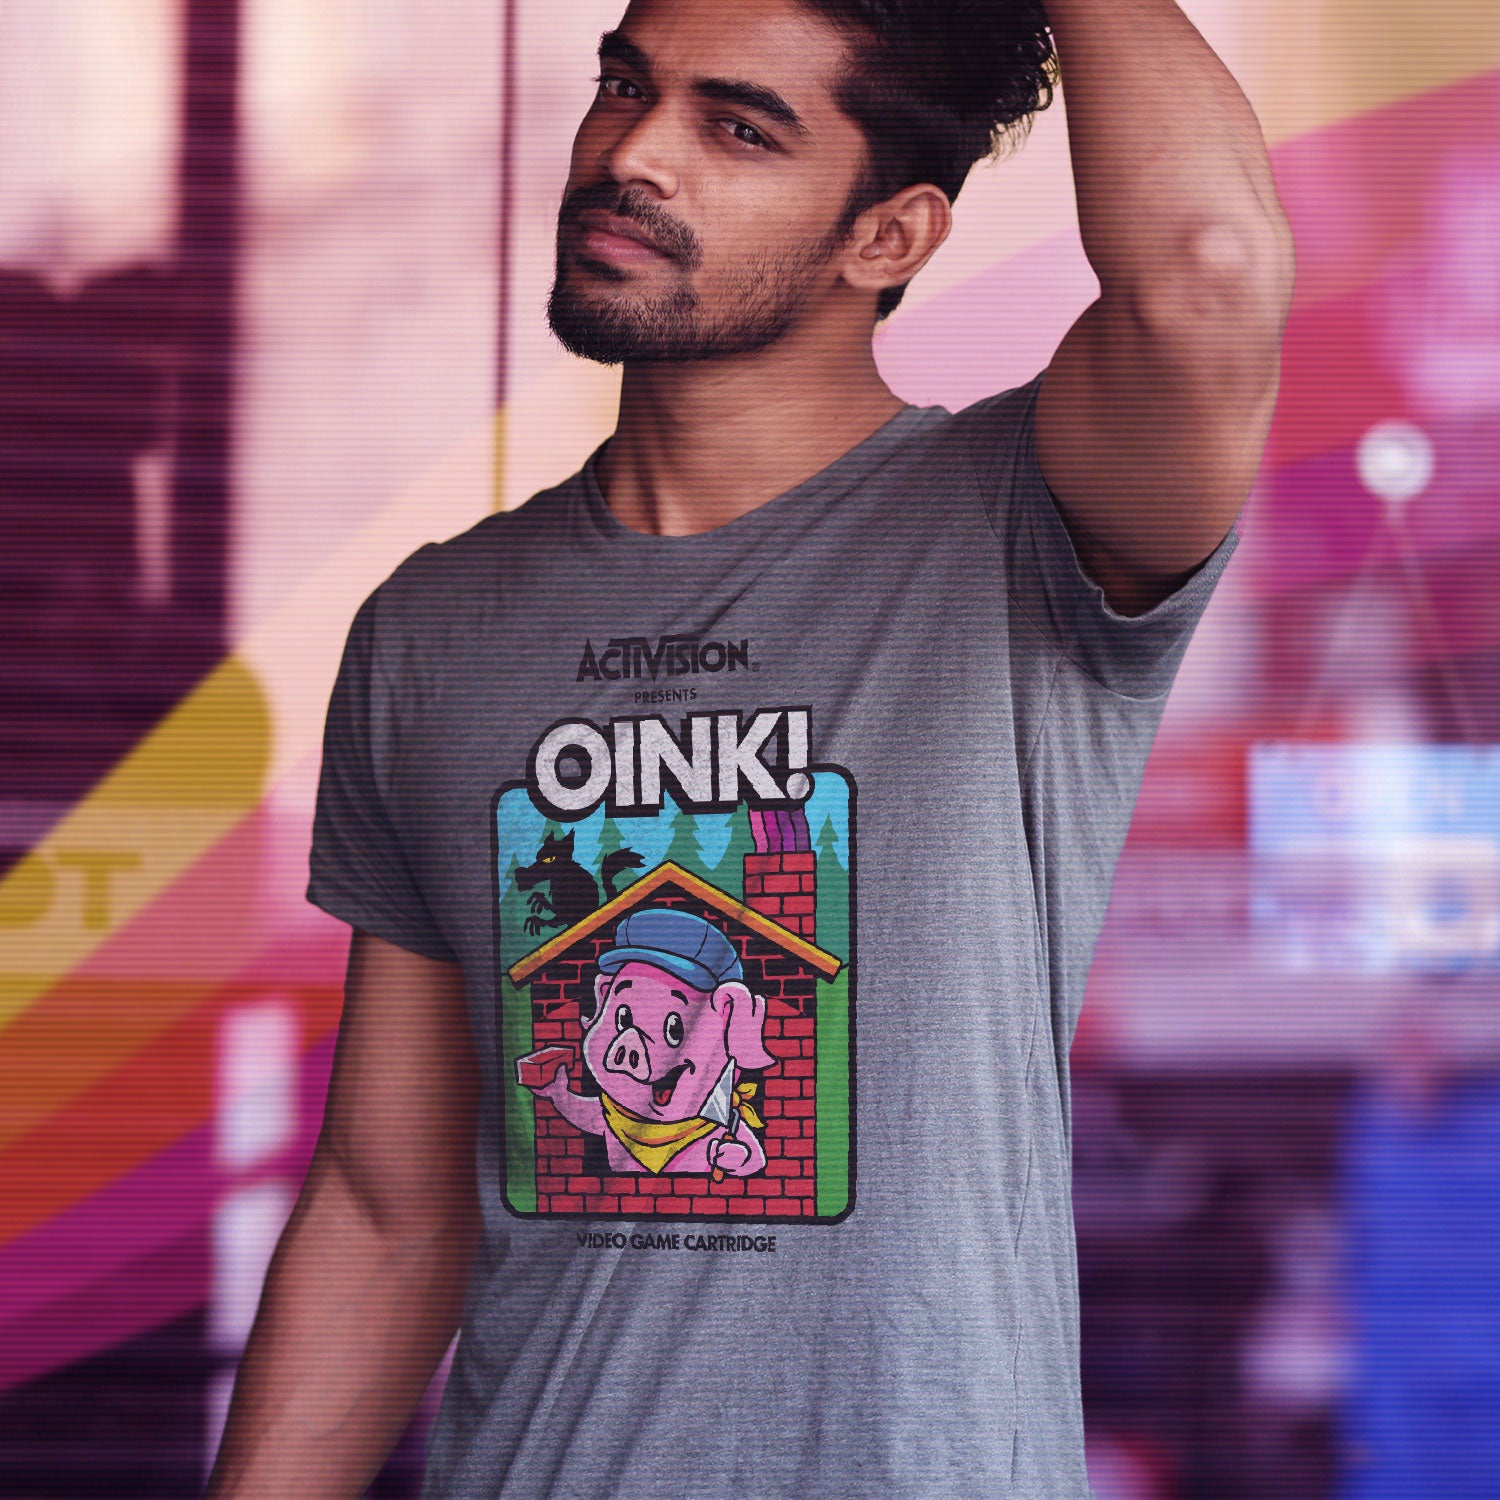 Oink! Activision Men's T-shirt in Grey Casual Style Fit